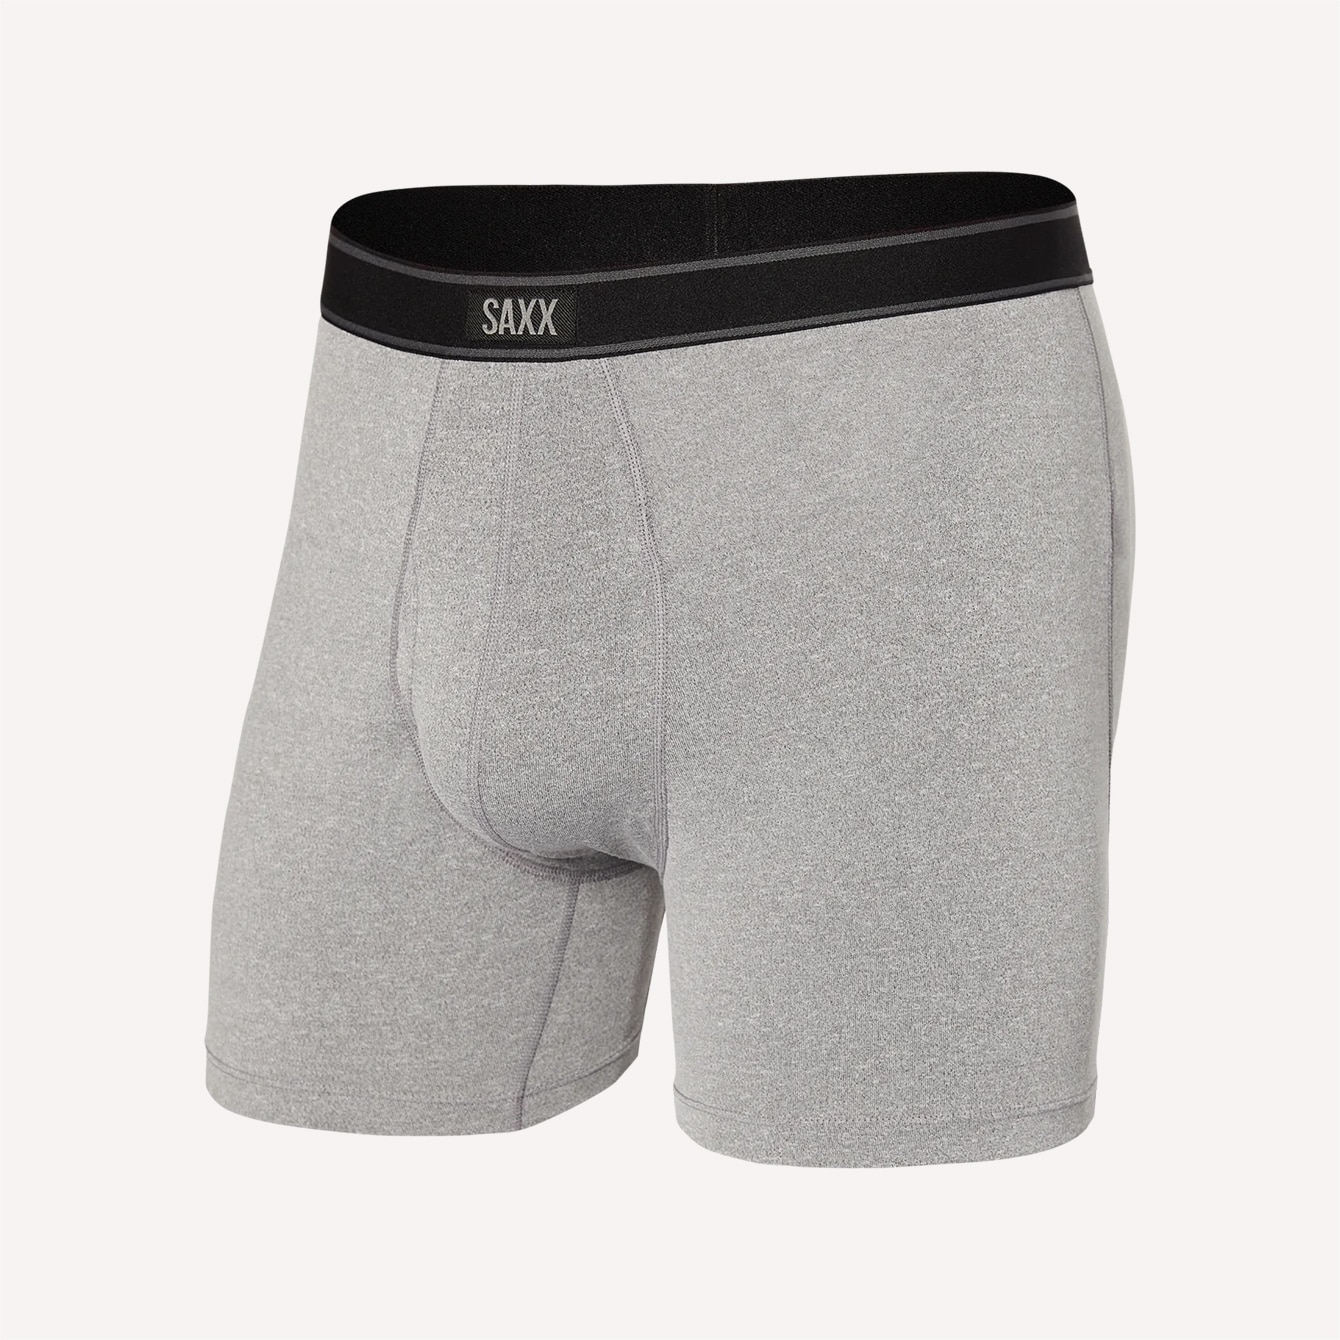 In Brief: The Top 5 Specialty Underwear For Men - View the VIBE